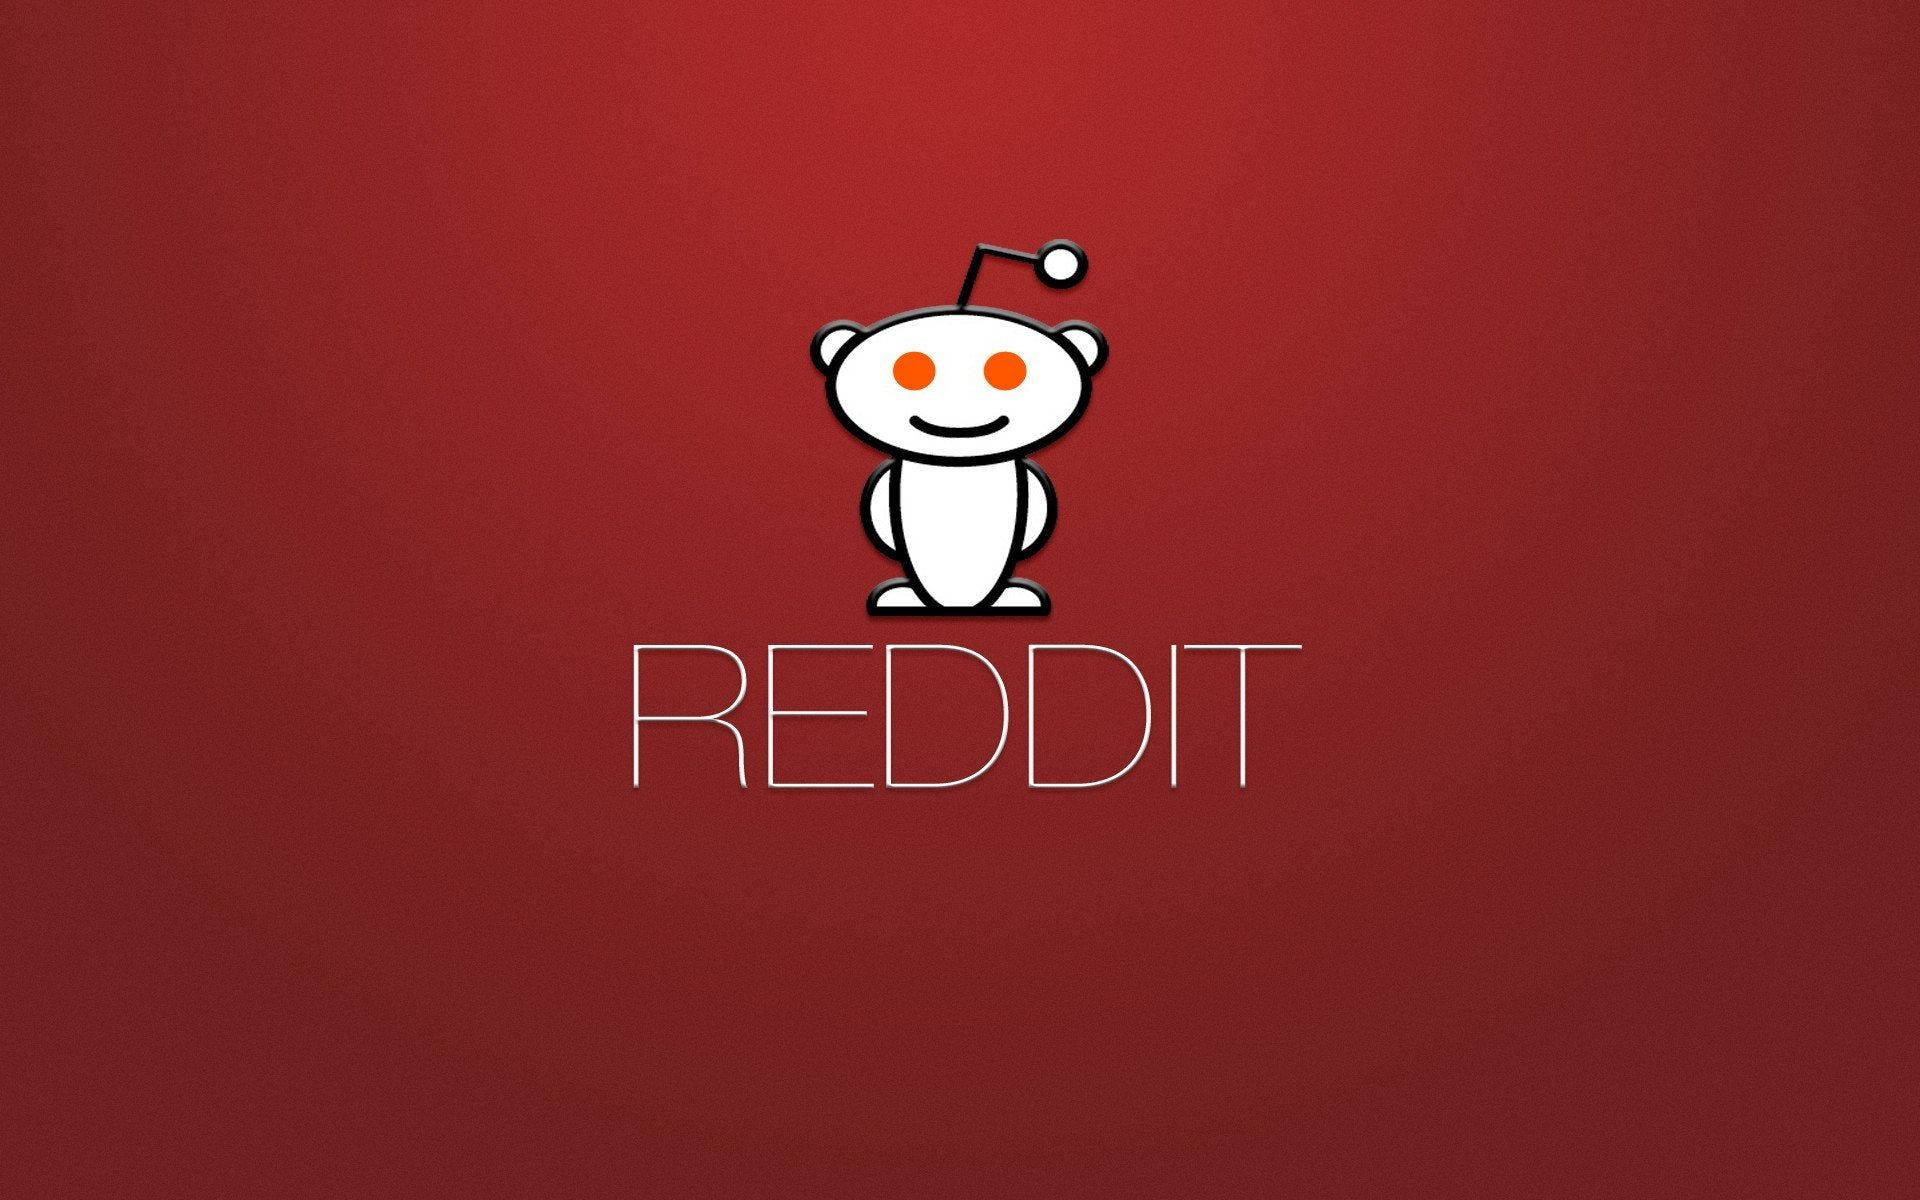 Red Reddit Logo And Title Background